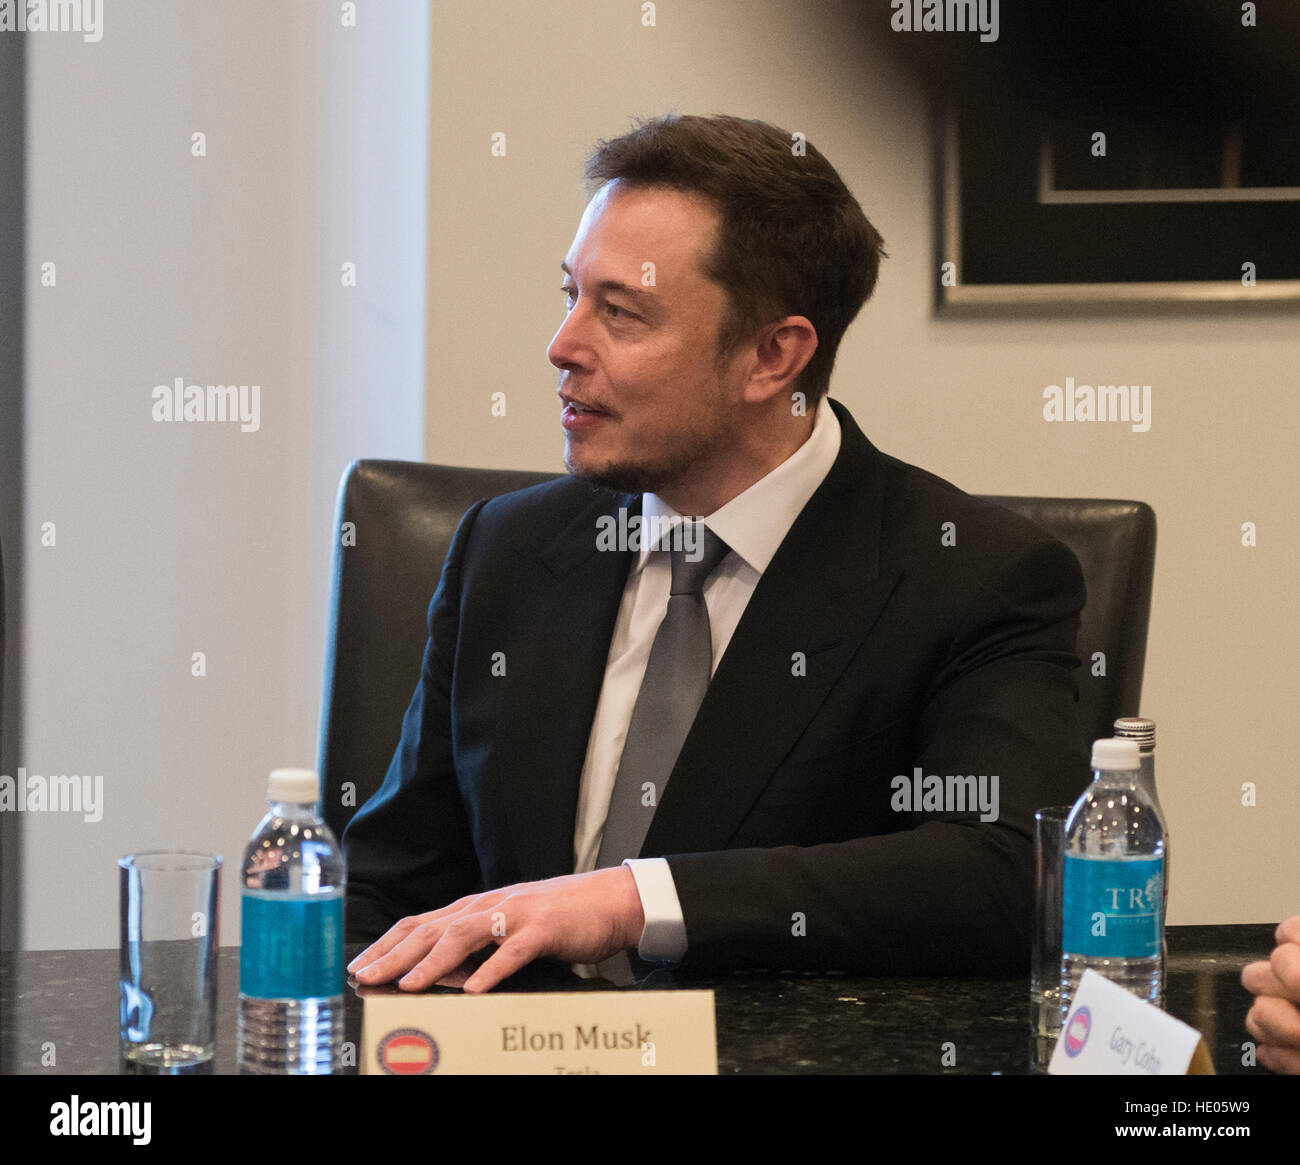 New York, Us. 14th Dec, 2016. Tesla CEO Elon Musk is seen at a meeting of technology leaders in the Trump Organization conference room at Trump Tower in New York, USA 14 December 2016.- NO WIRE SERVICE - Photo: Albin Lohr-Jones/Consolidated/dpa/Alamy Live News Stock Photo